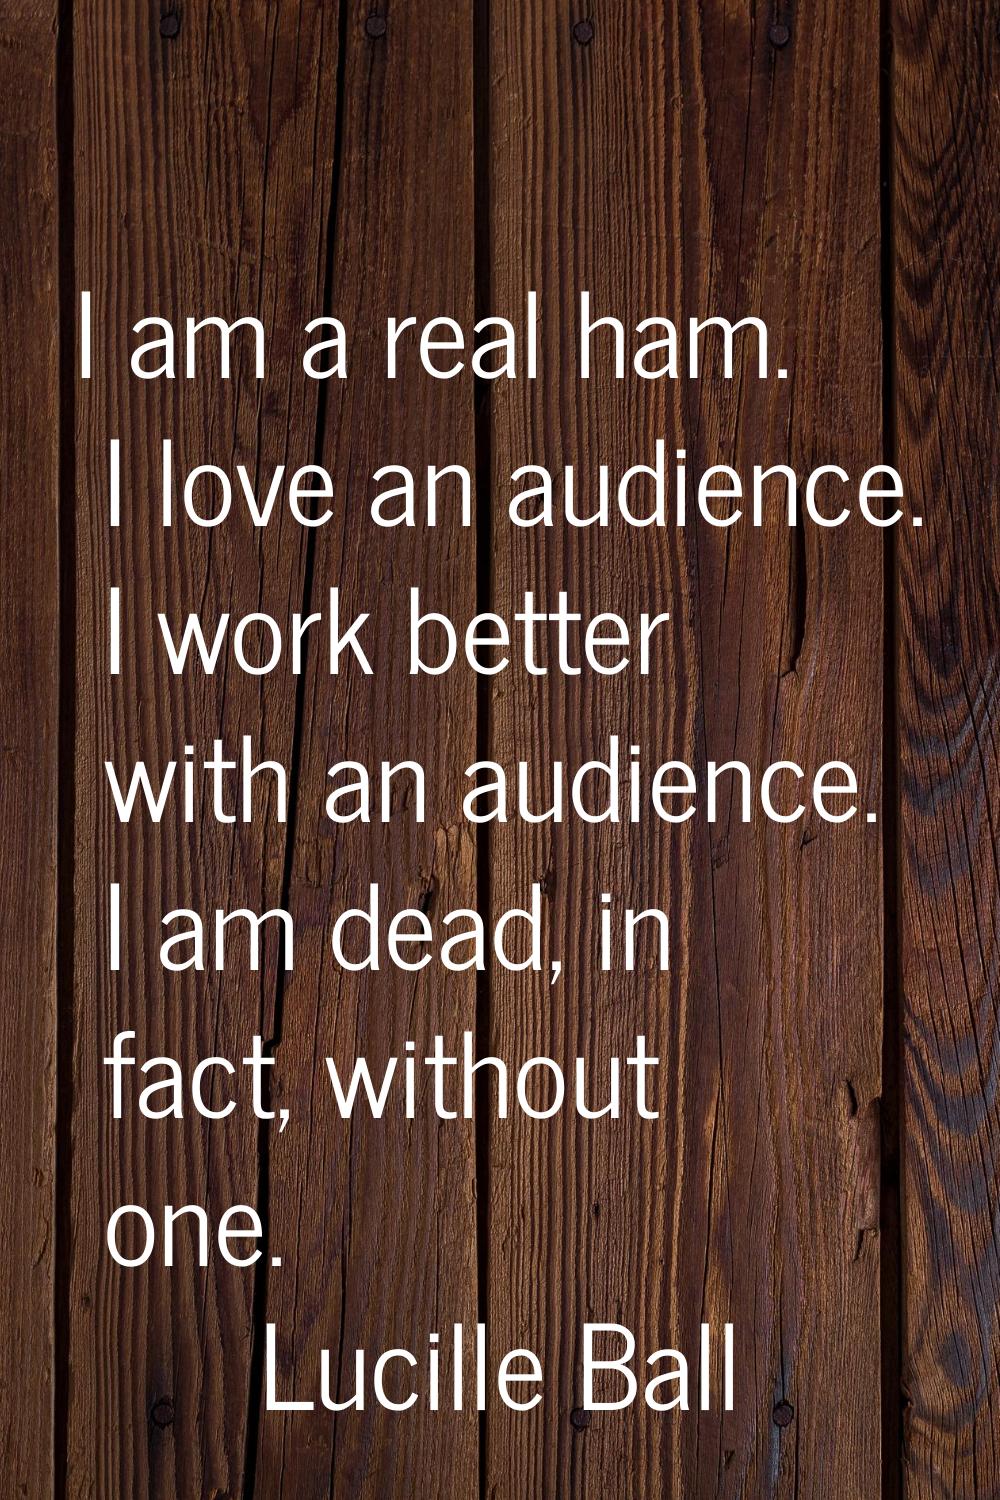 I am a real ham. I love an audience. I work better with an audience. I am dead, in fact, without on